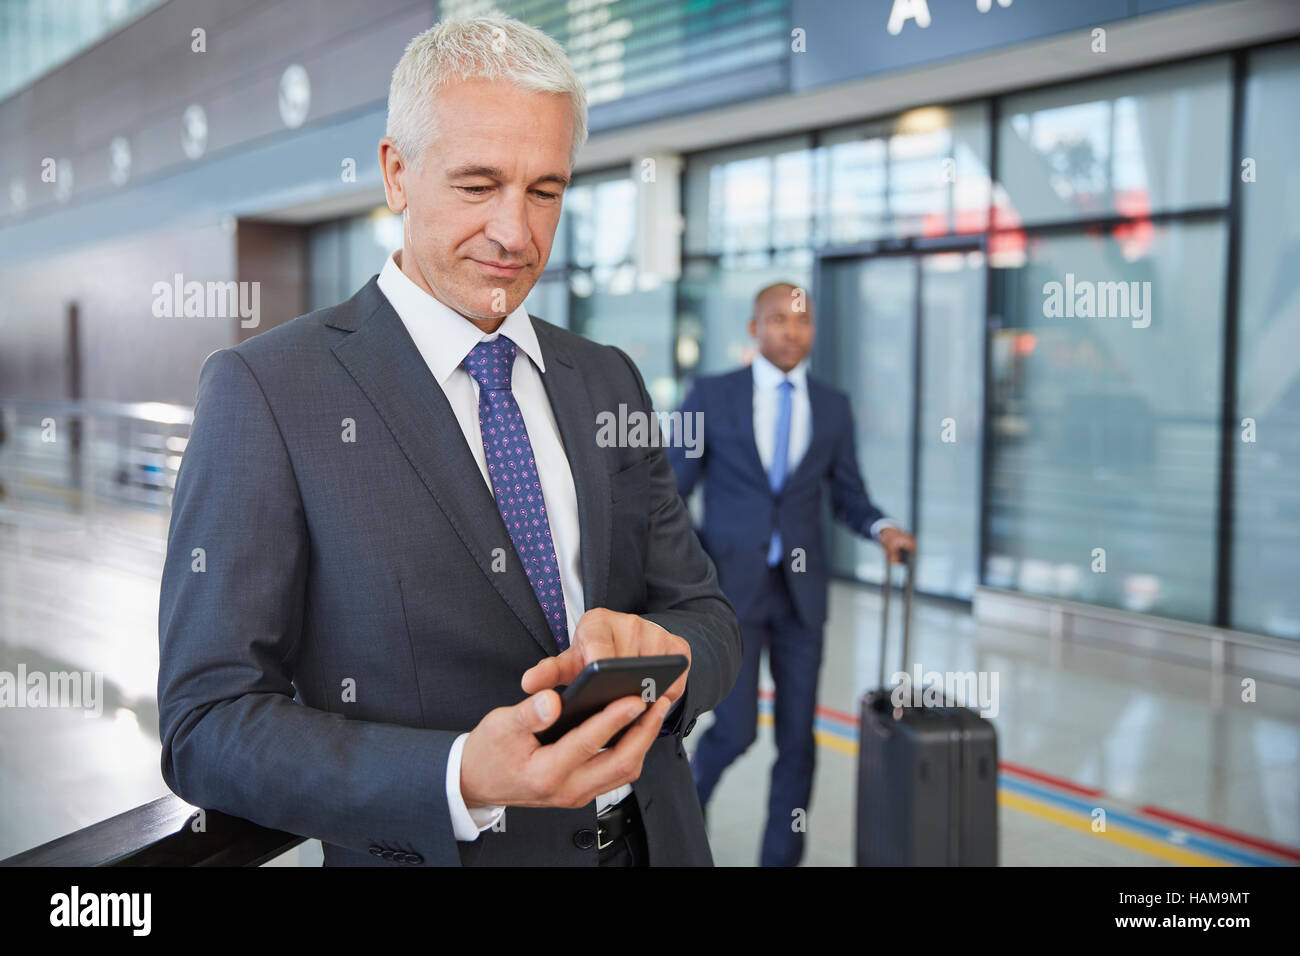 Businessman texting with cell phone in airport concourse Stock Photo